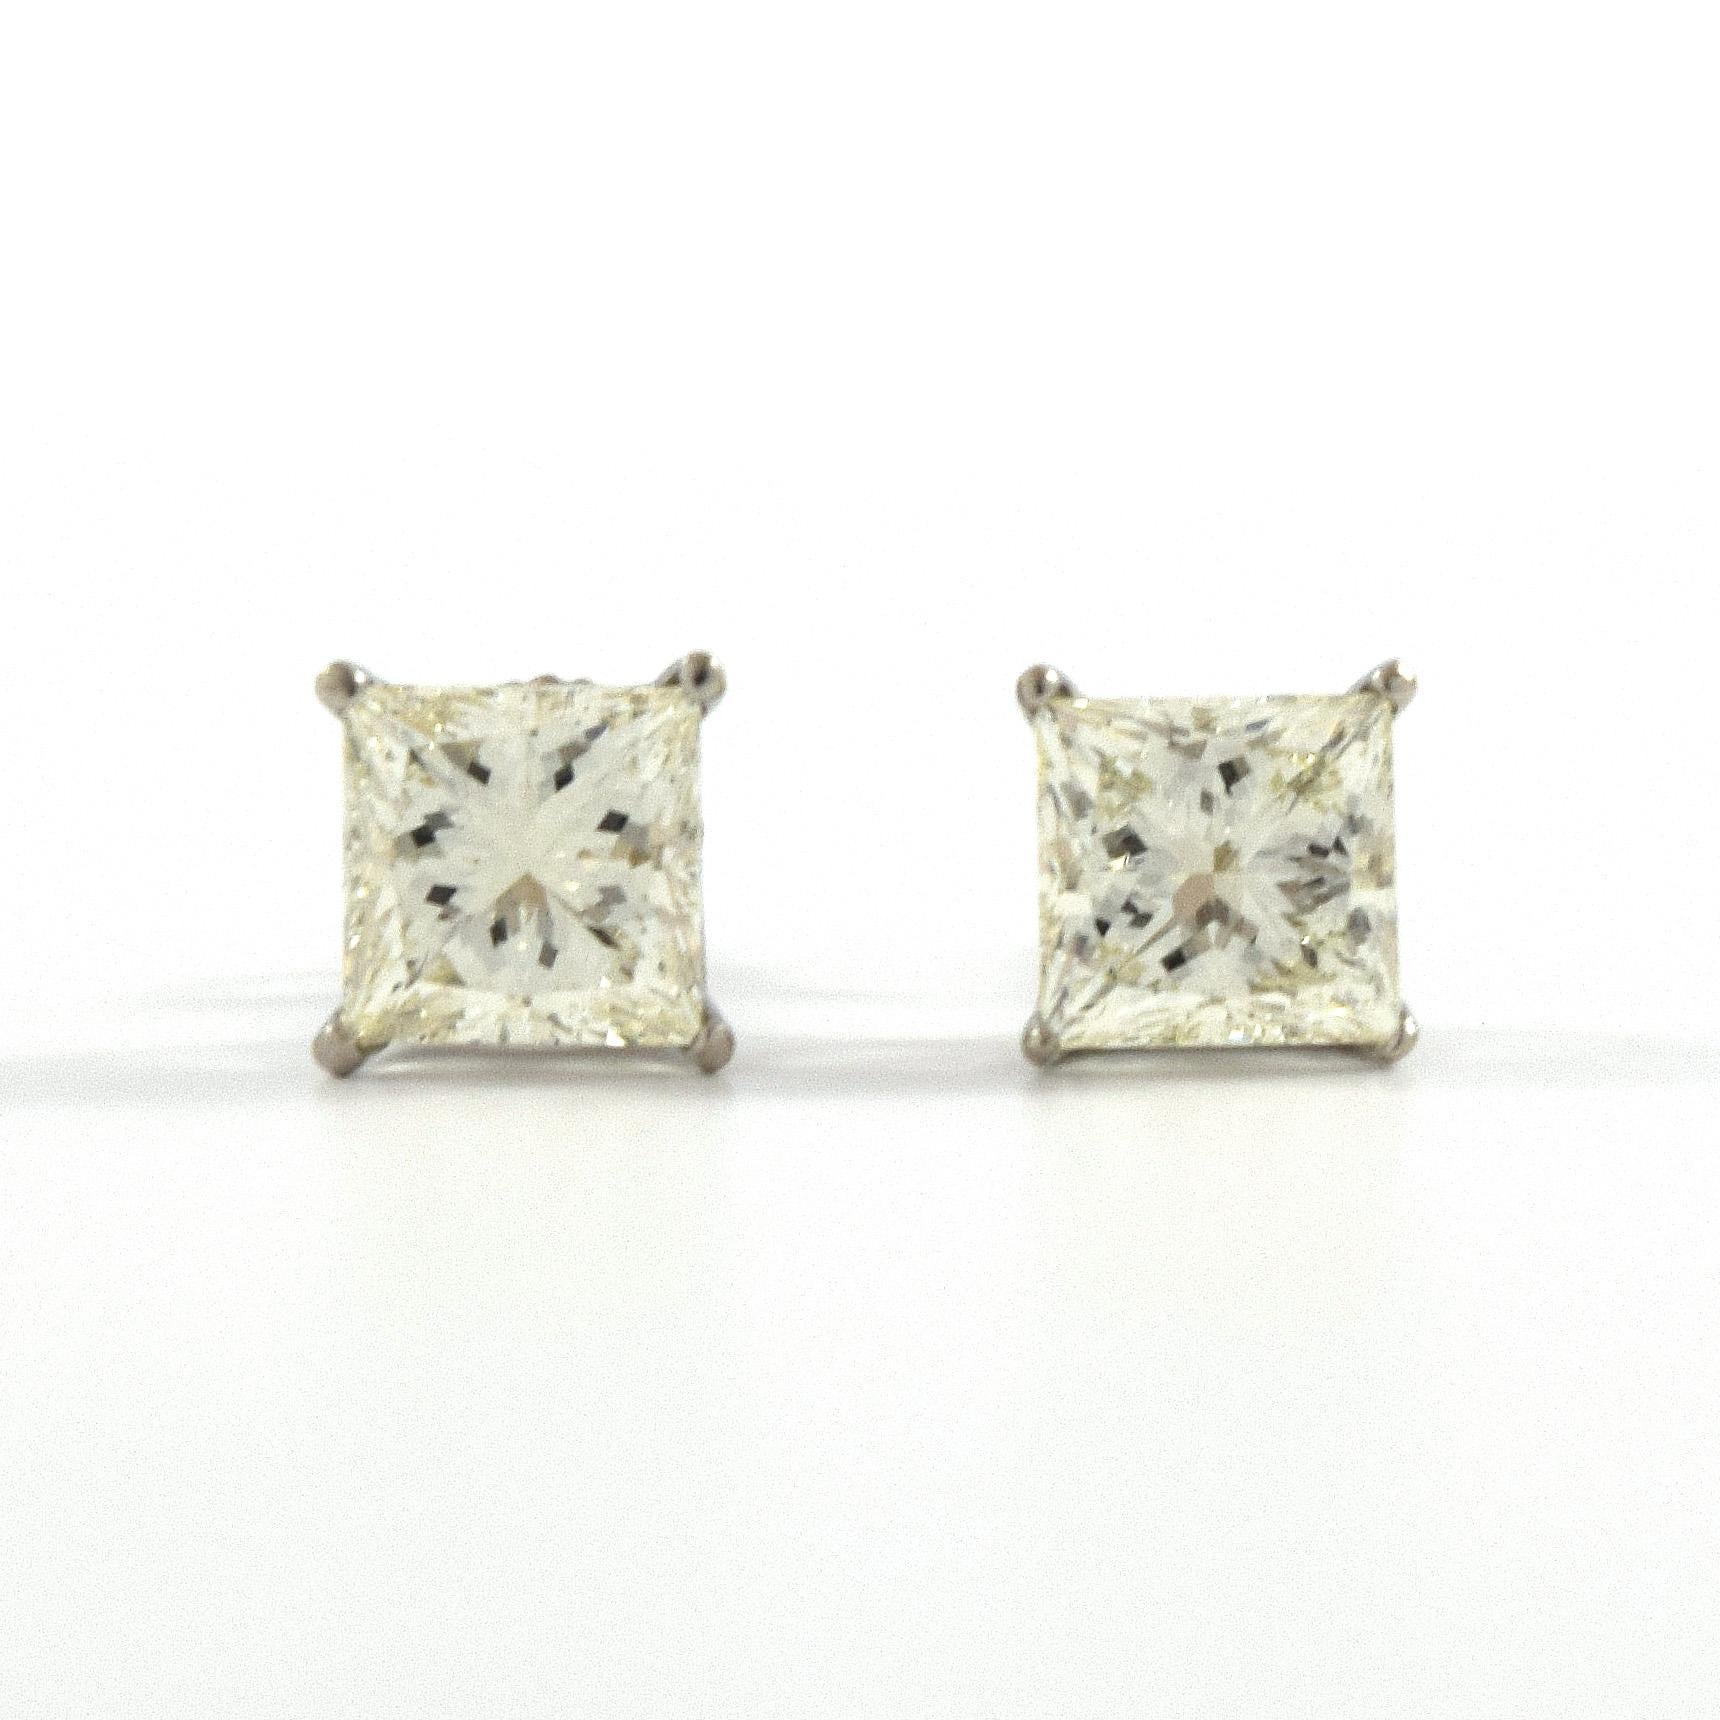 3.03 Carat Princess Cut White Diamonds Studs In Excellent Condition For Sale In Los Angeles, CA